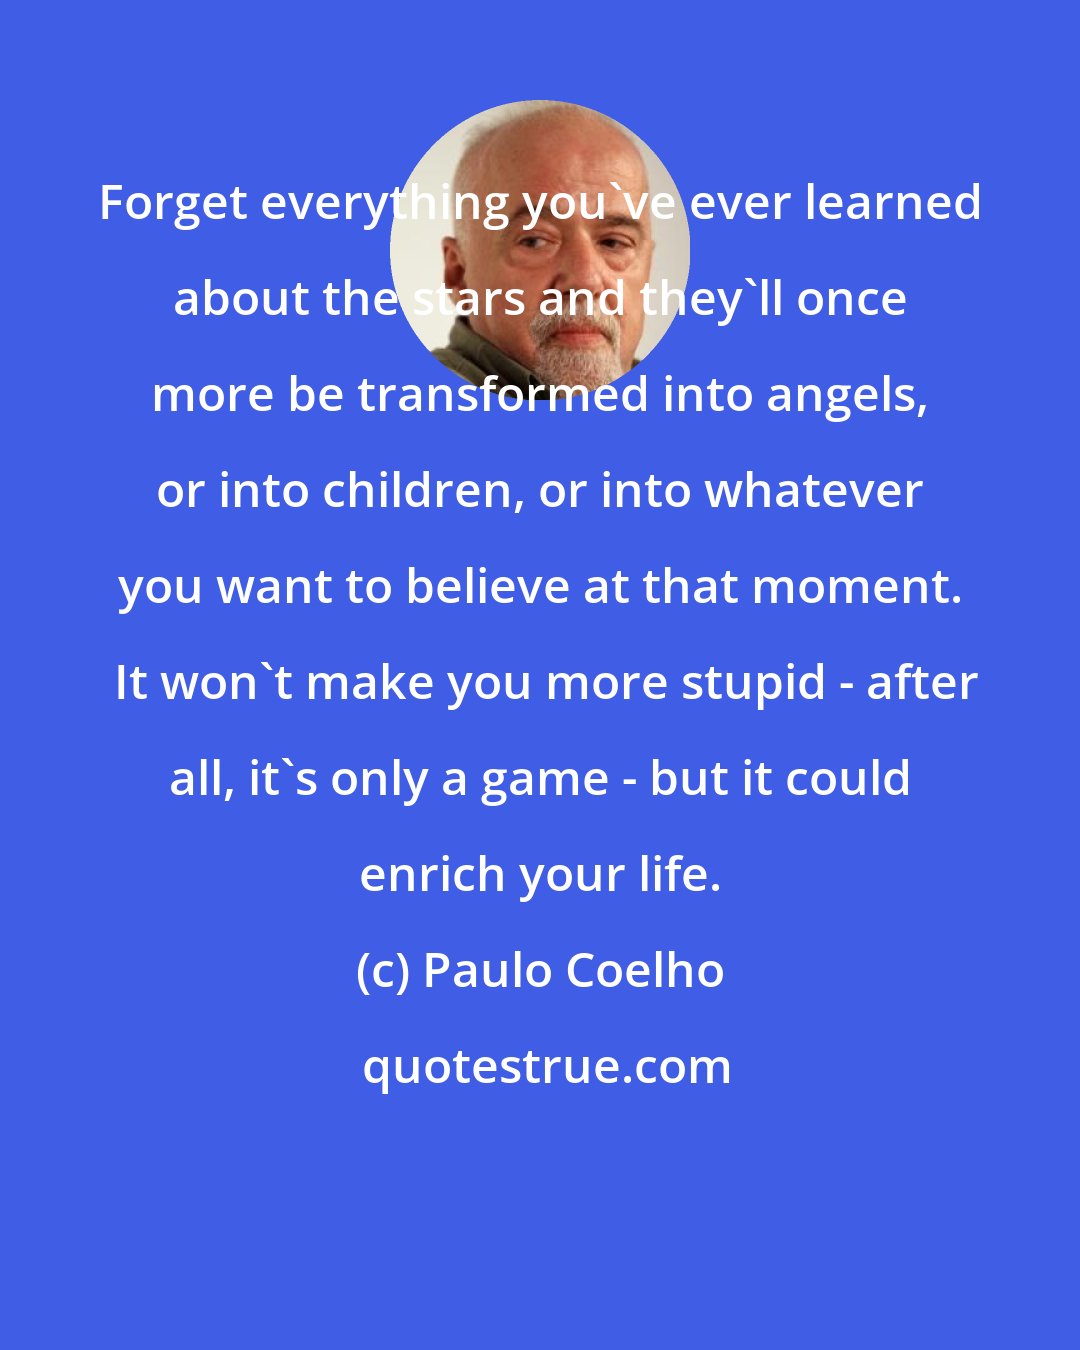 Paulo Coelho: Forget everything you've ever learned about the stars and they'll once more be transformed into angels, or into children, or into whatever you want to believe at that moment.  It won't make you more stupid - after all, it's only a game - but it could enrich your life.